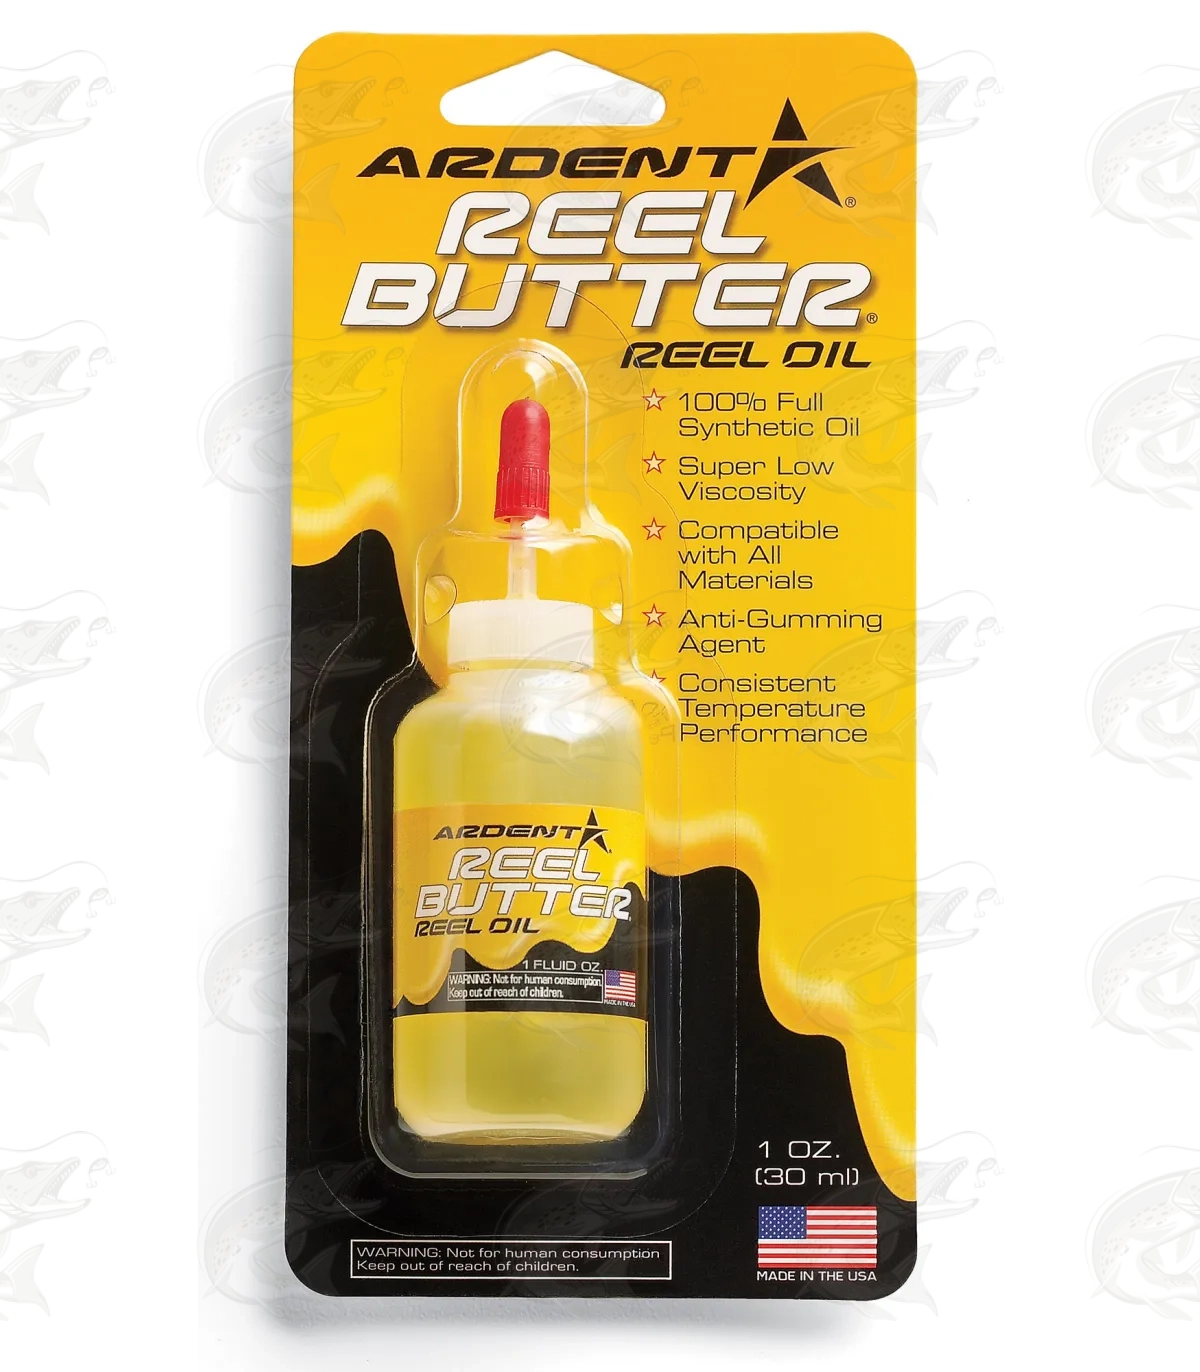 Ardent Line Butter - Fishing Accessories